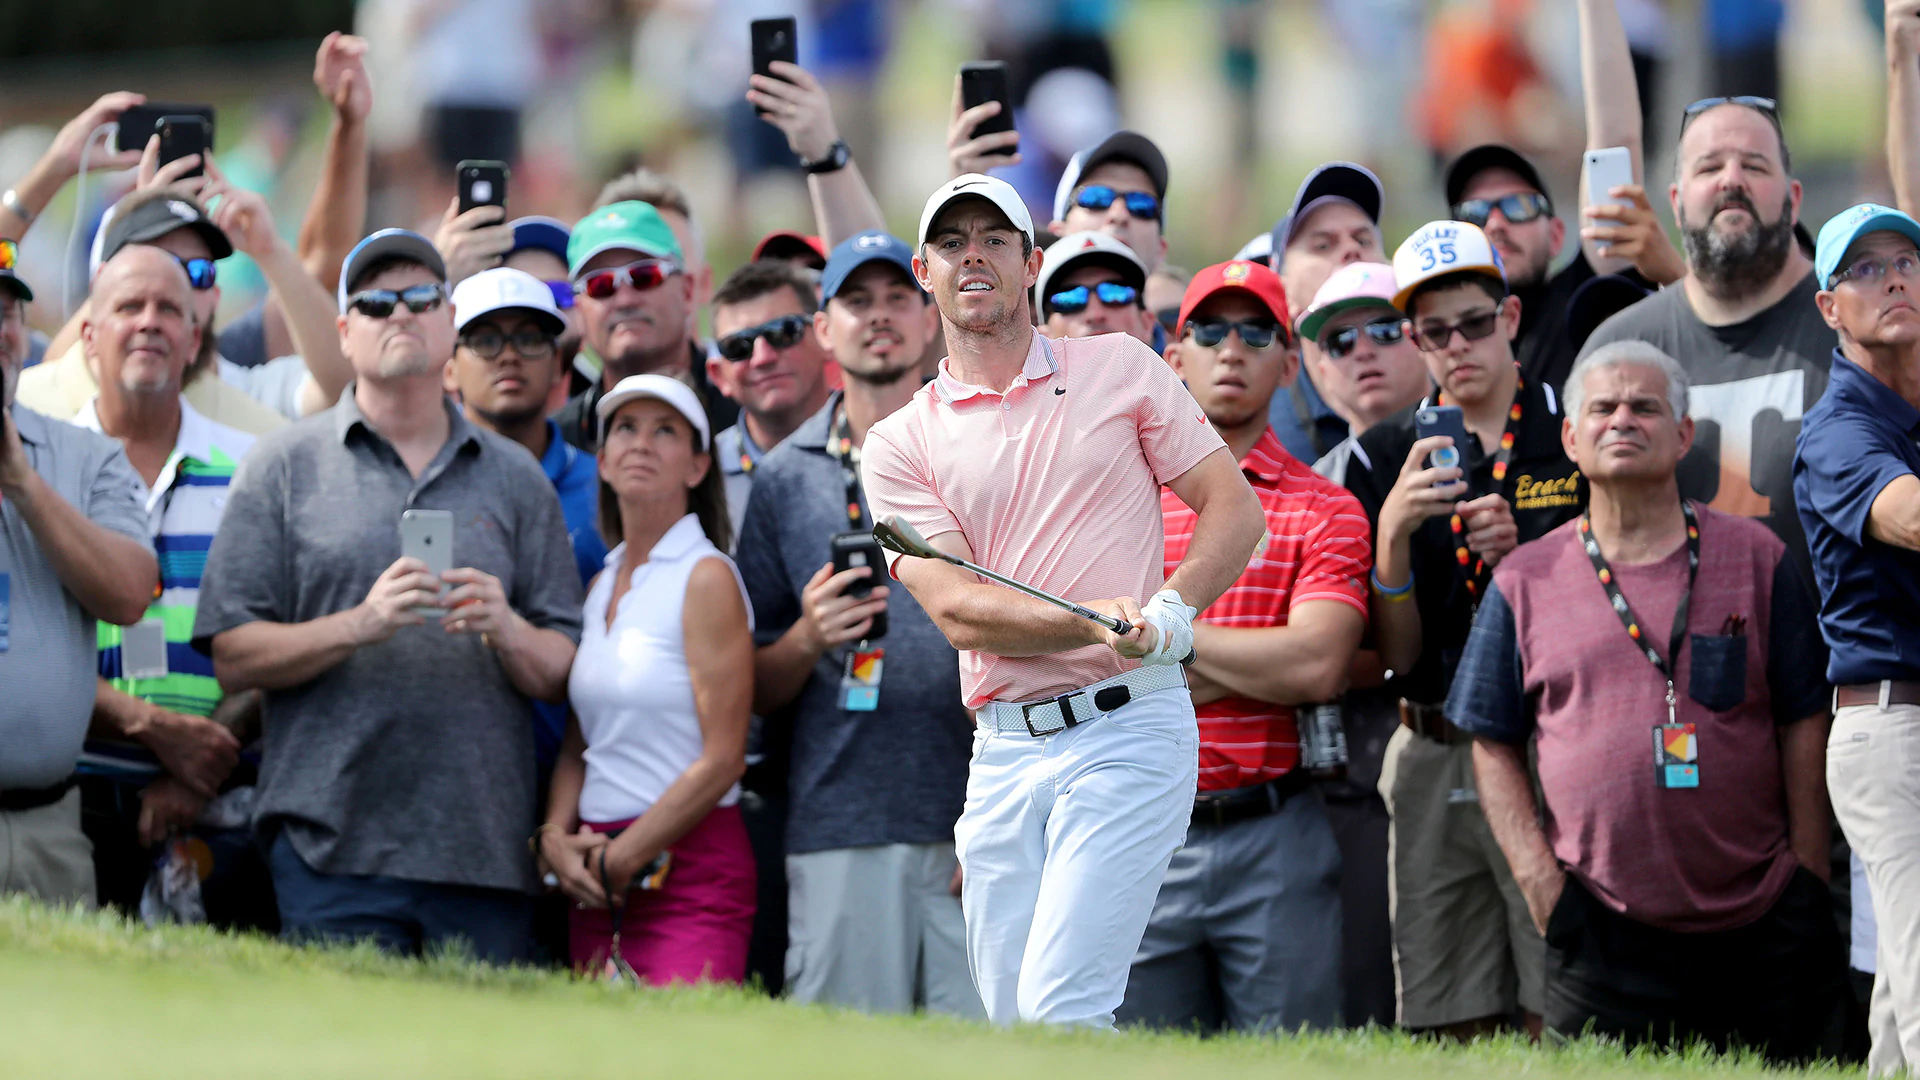 Rory (66) returns to Disney for good luck at Bay Hill